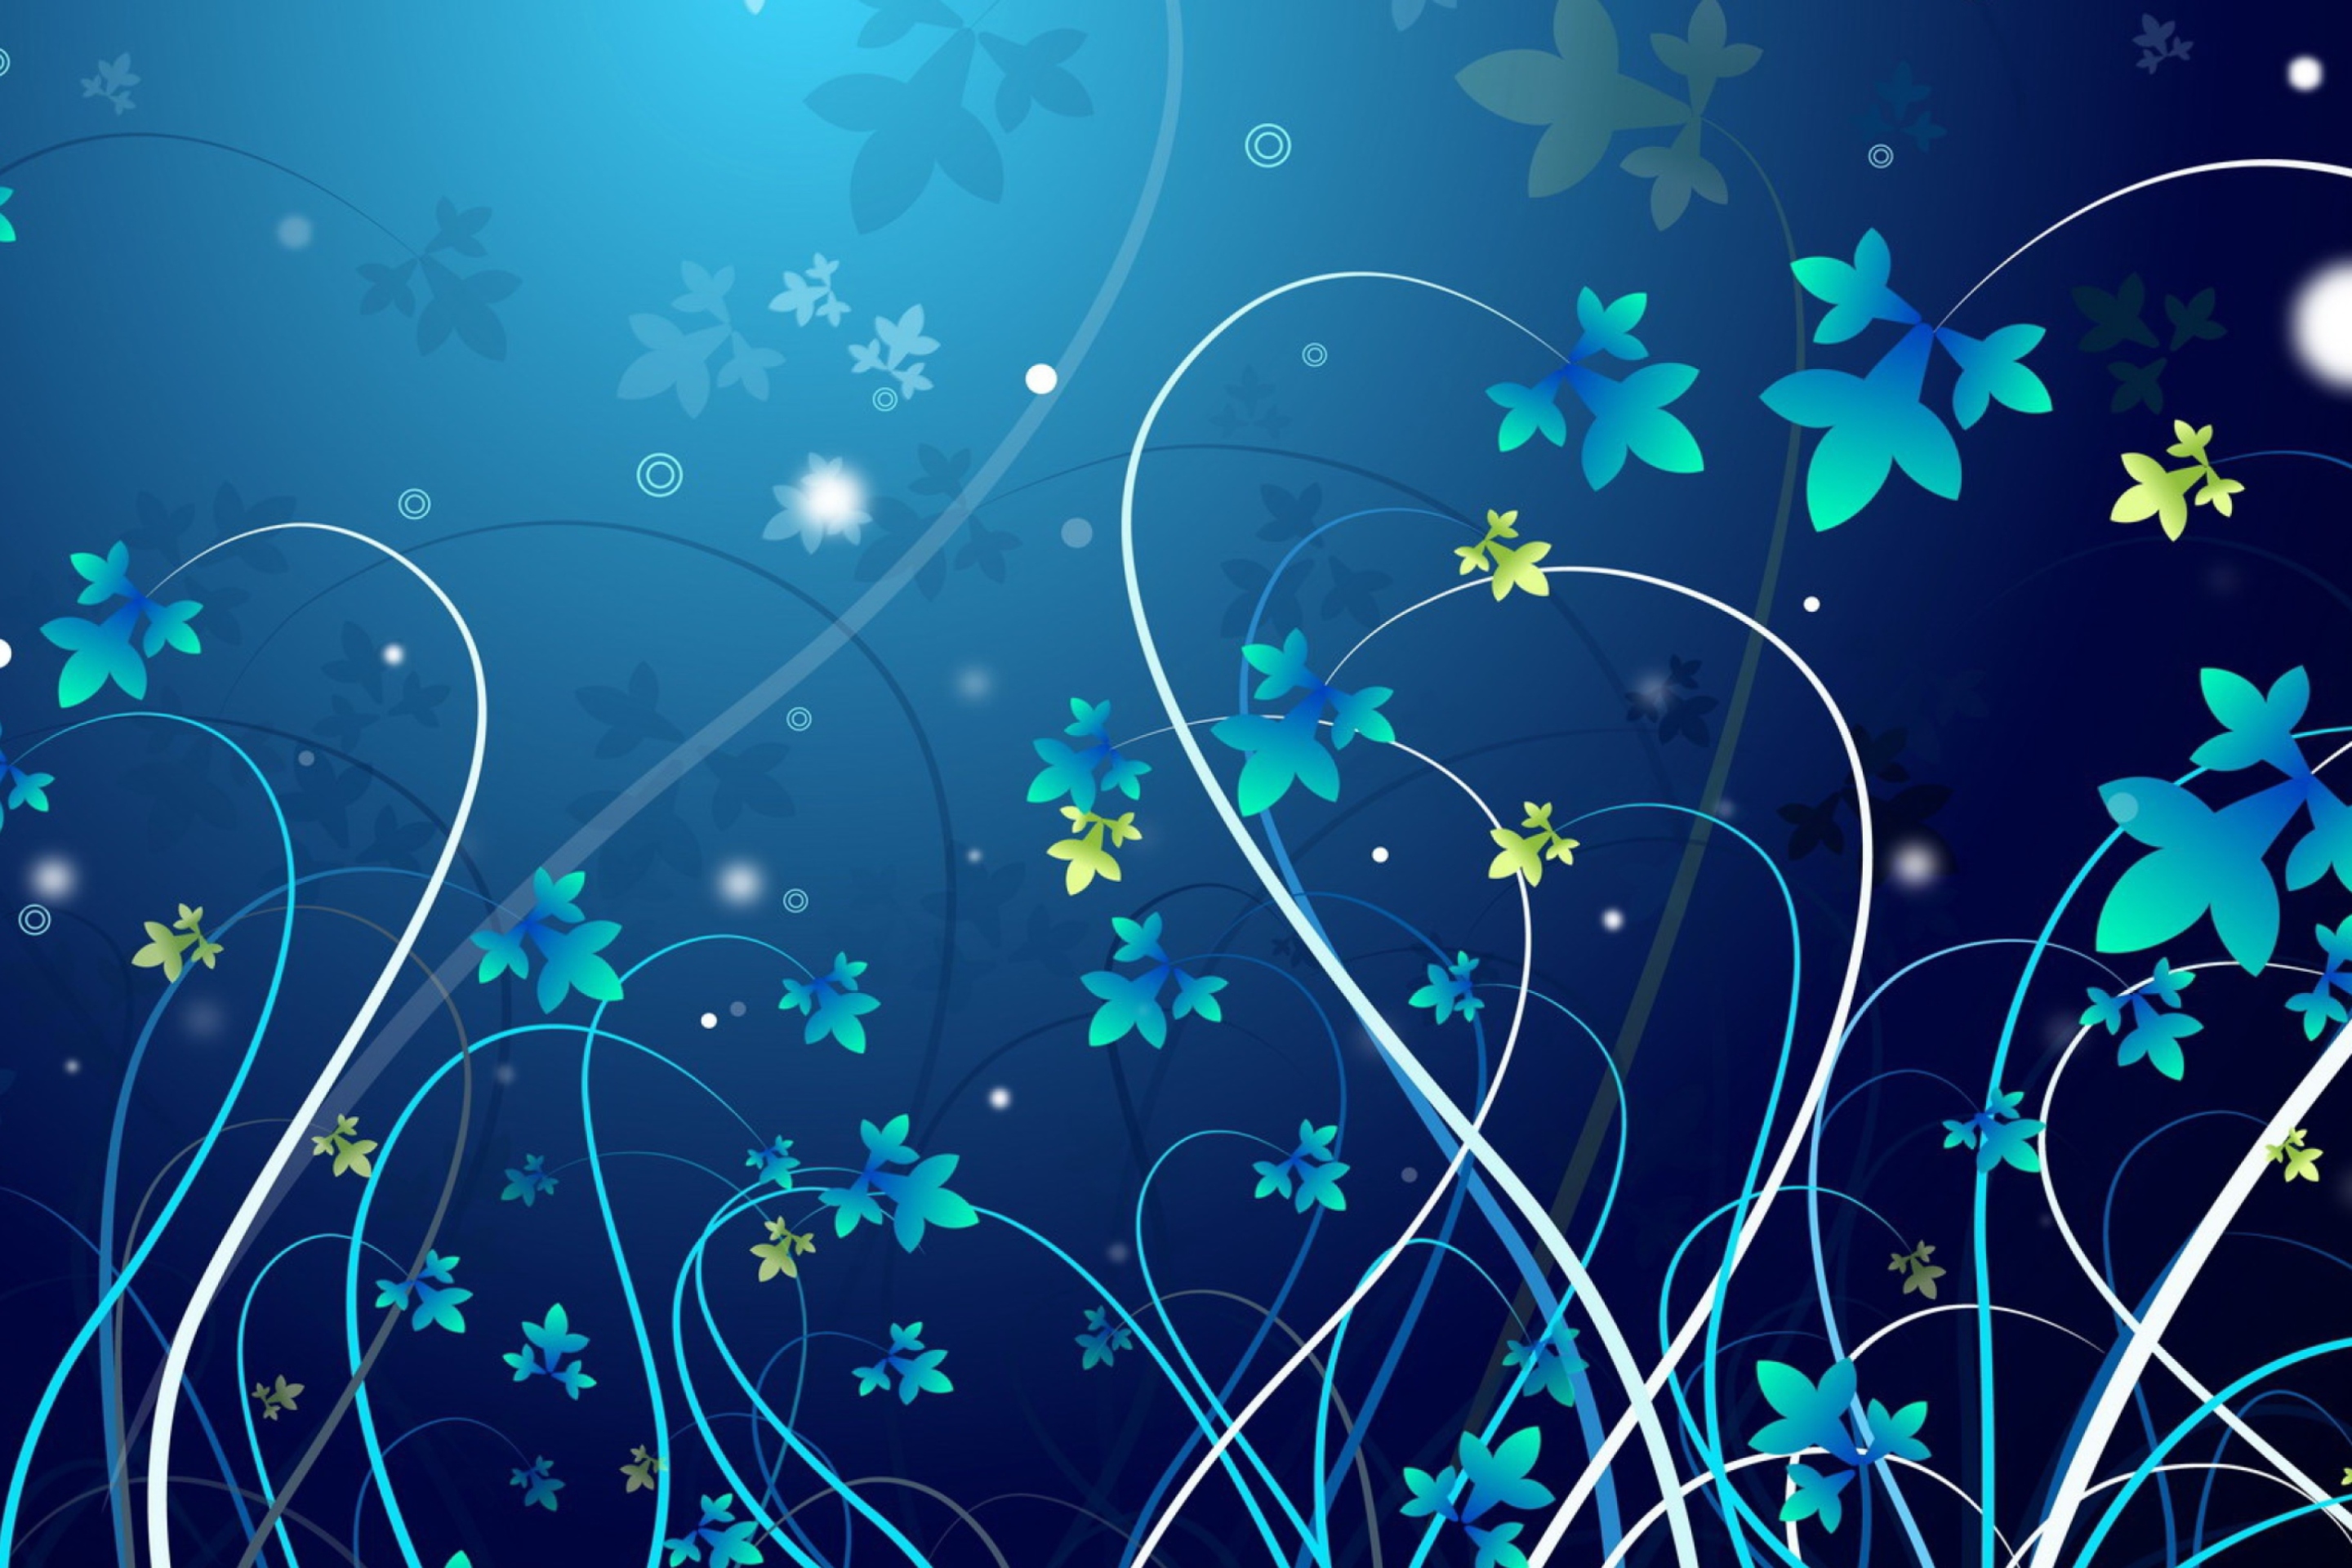 Blue Abstract Background wallpaper 2880x1920